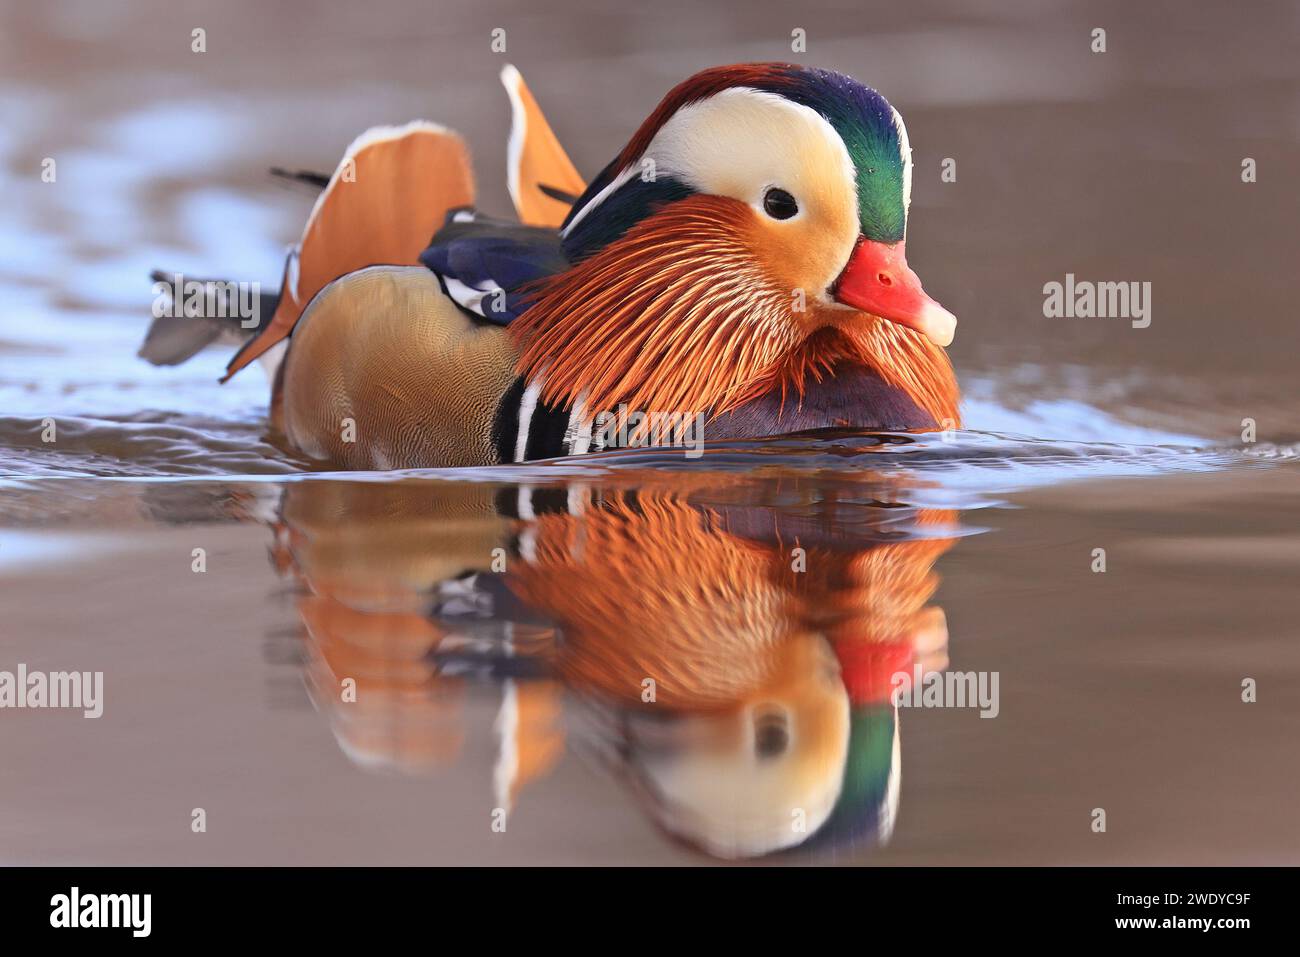 Mandarin duck portrait in winter with nice reflections Stock Photo